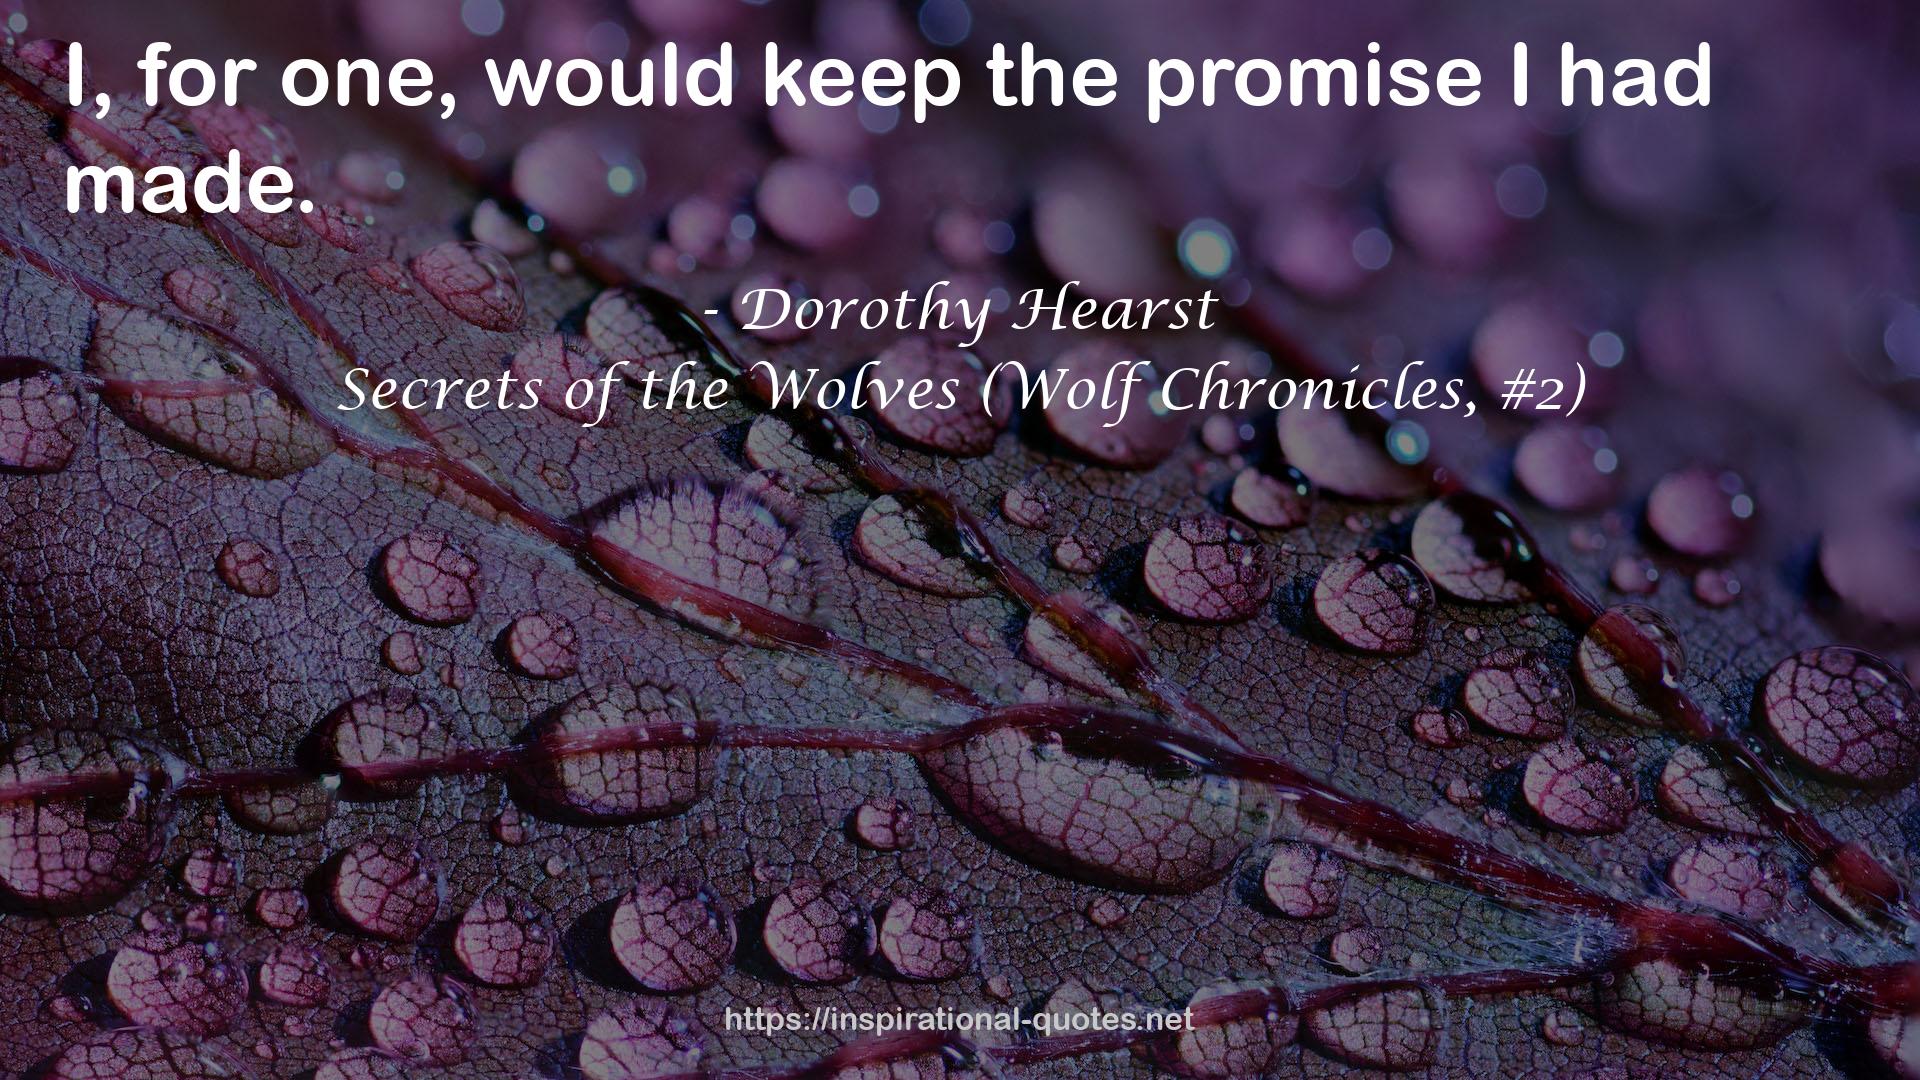 Secrets of the Wolves (Wolf Chronicles, #2) QUOTES